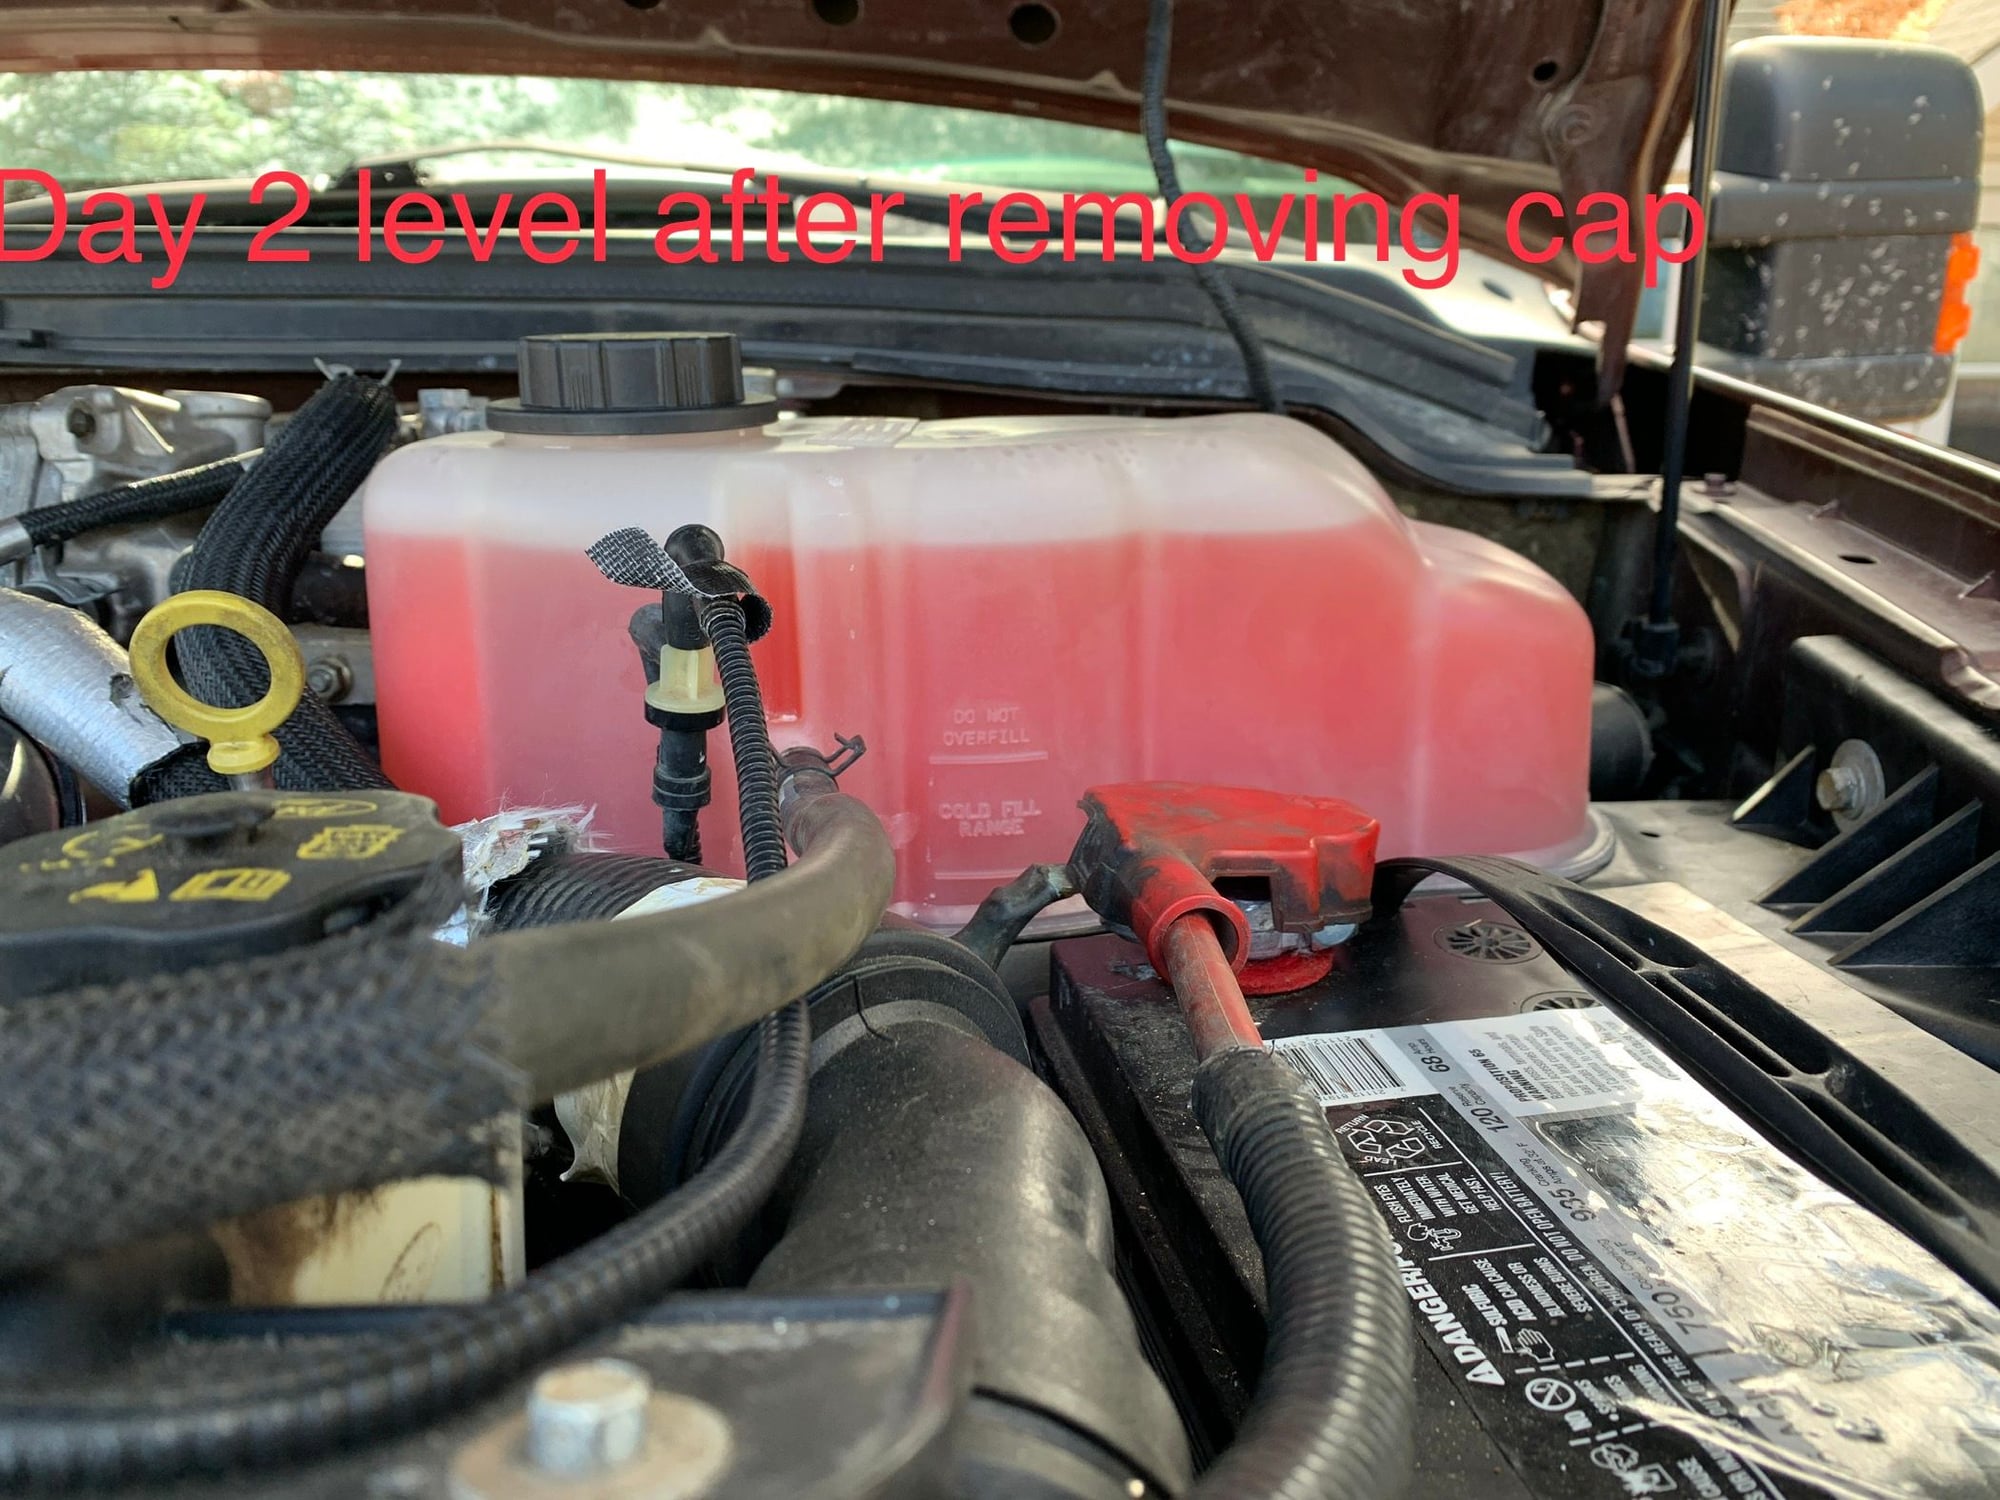 6.4 powerstroke coolant problems - Ford Truck Enthusiasts Forums 6.4 Powerstroke Losing Coolant No Leaks